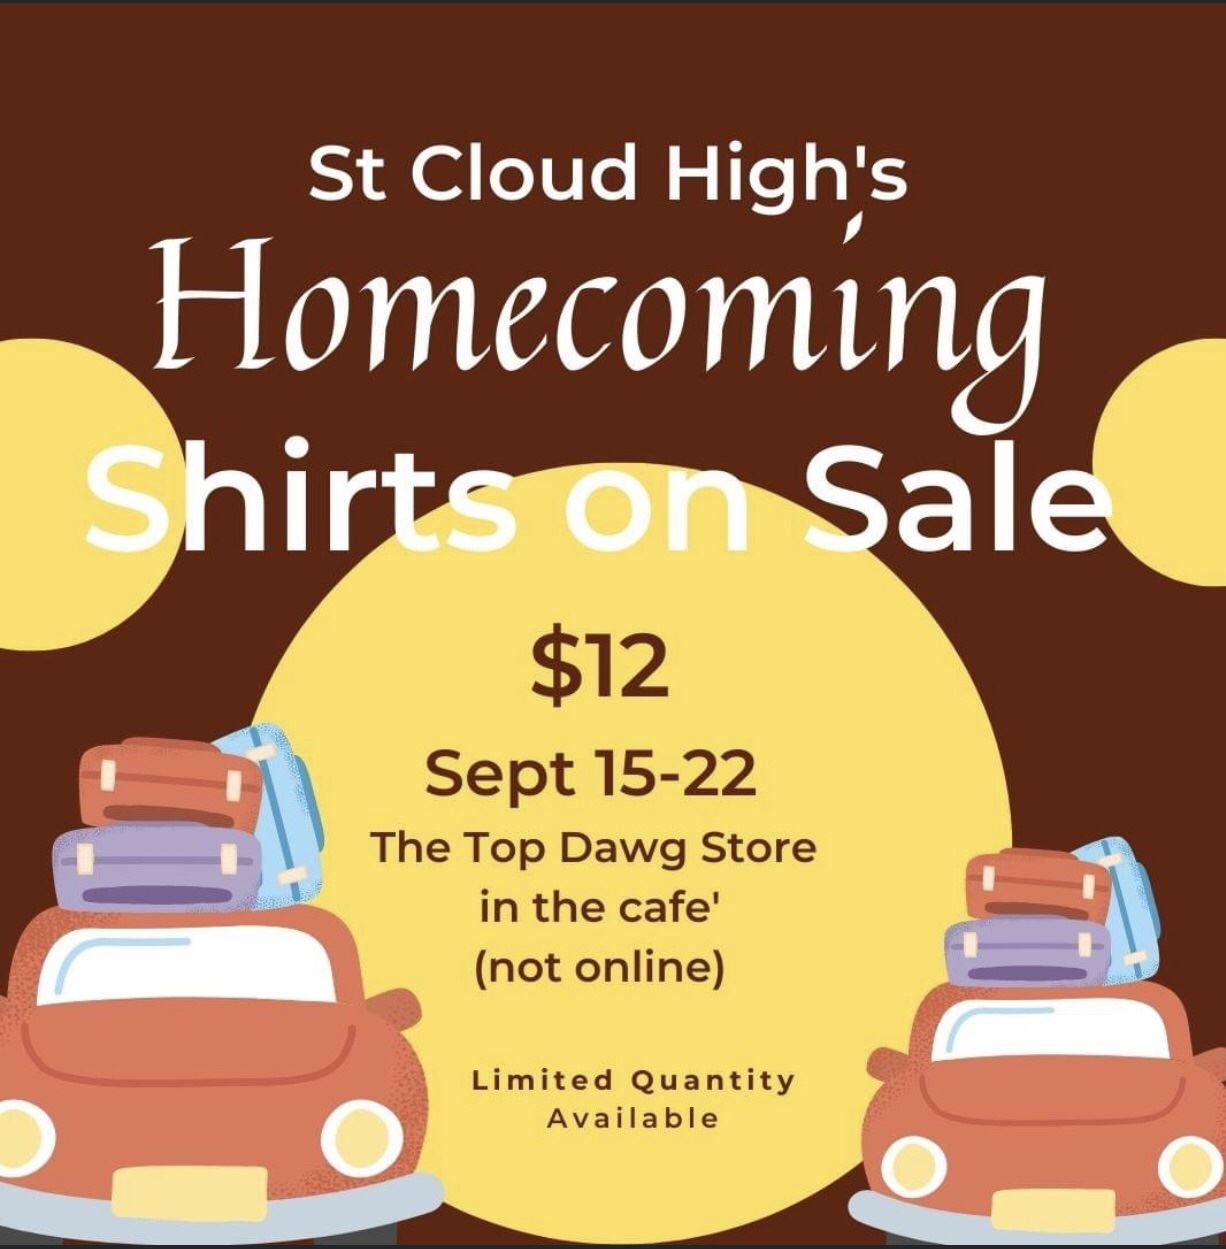  Flyer that says Homecoming Shirts on Sale